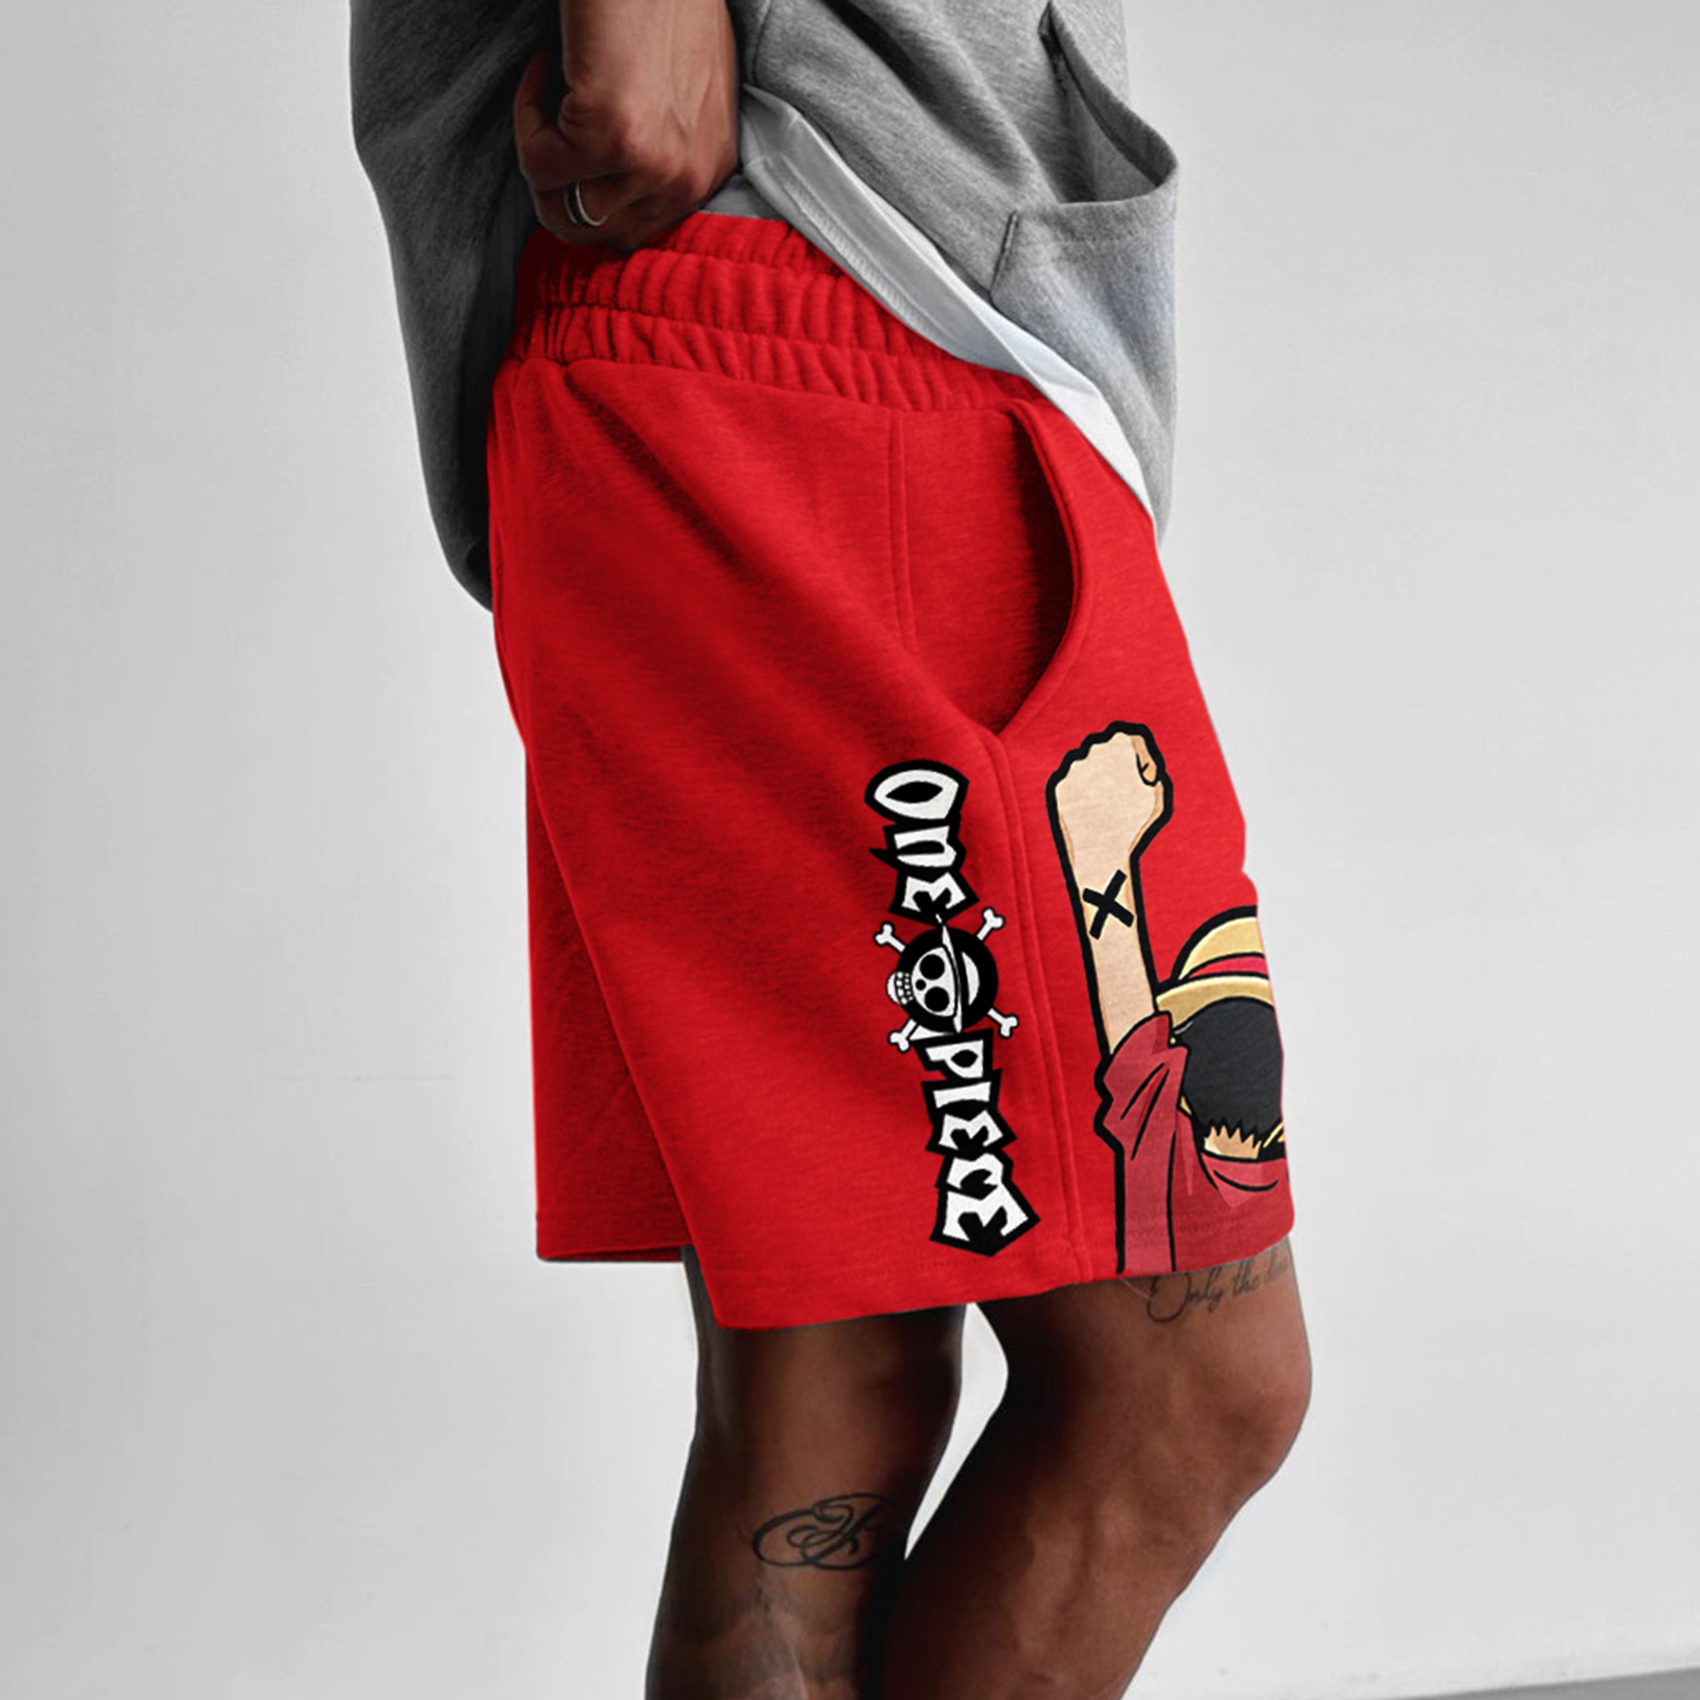 Unisex Casual "One Piece" Shorts